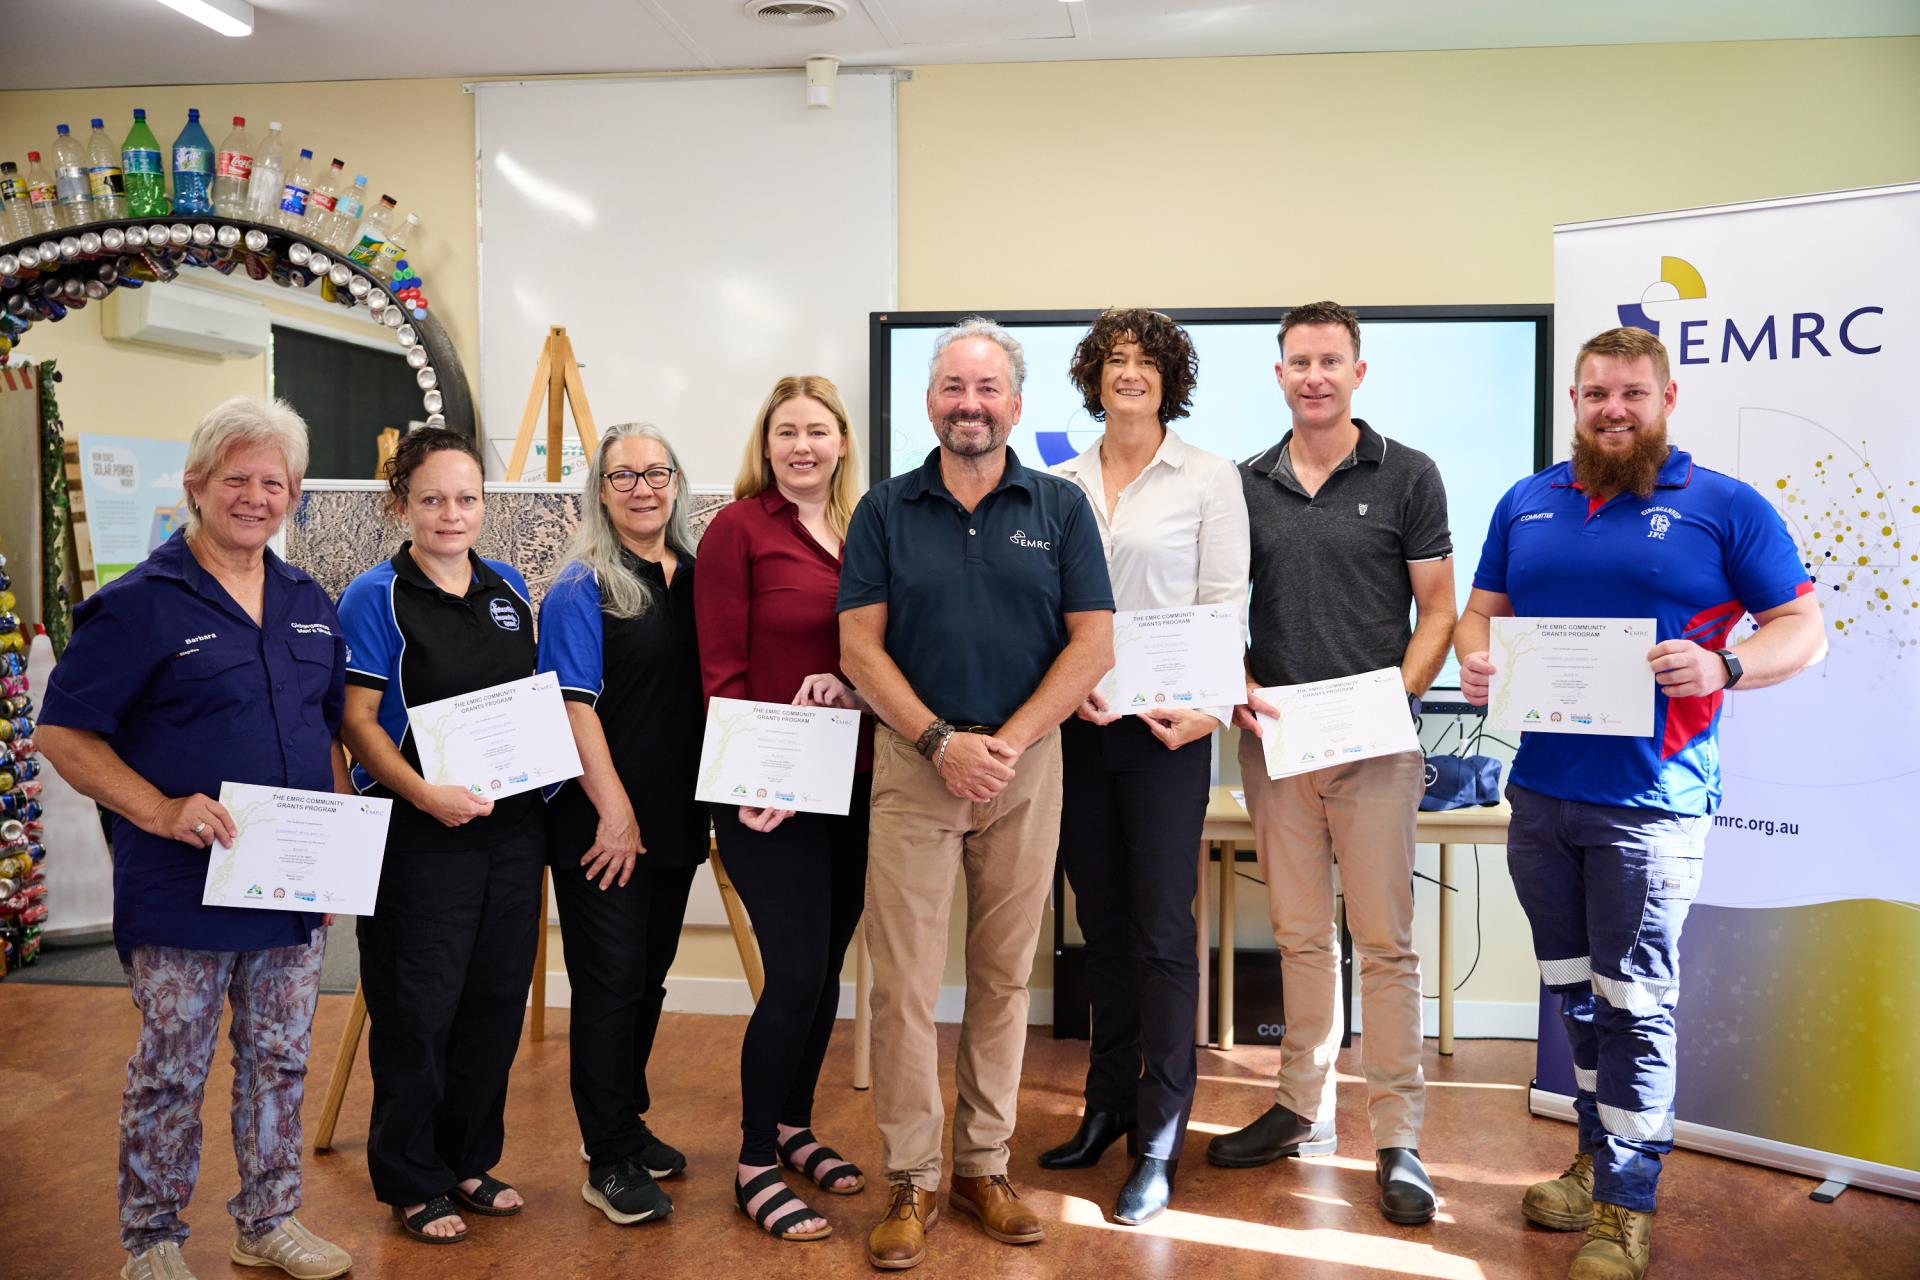 Strengthening Local Community Groups with the EMRC Grant Program